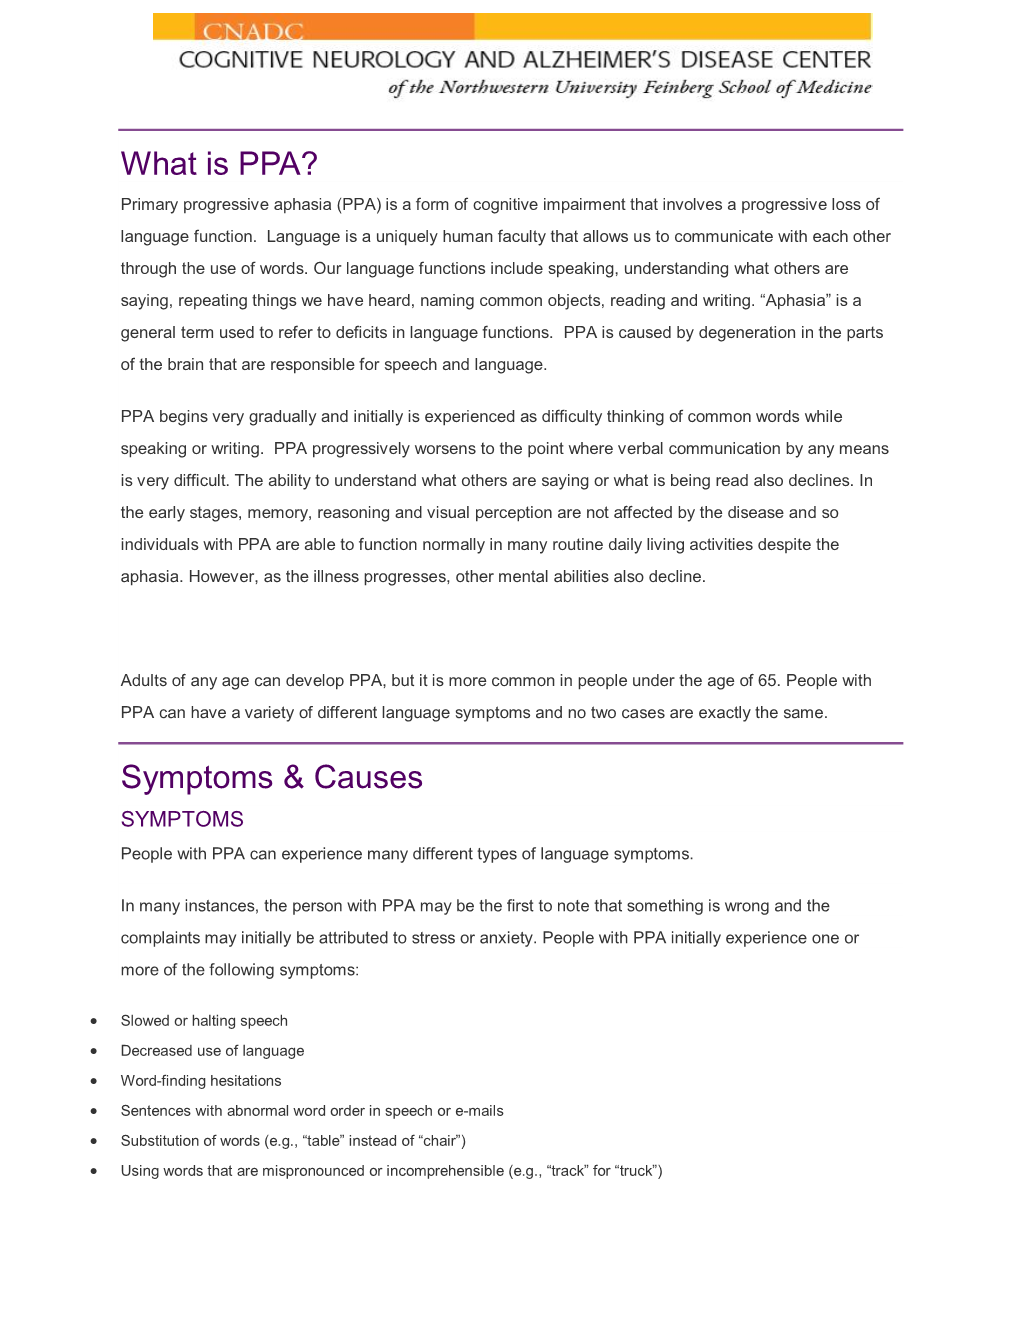 What Is PPA? Symptoms & Causes